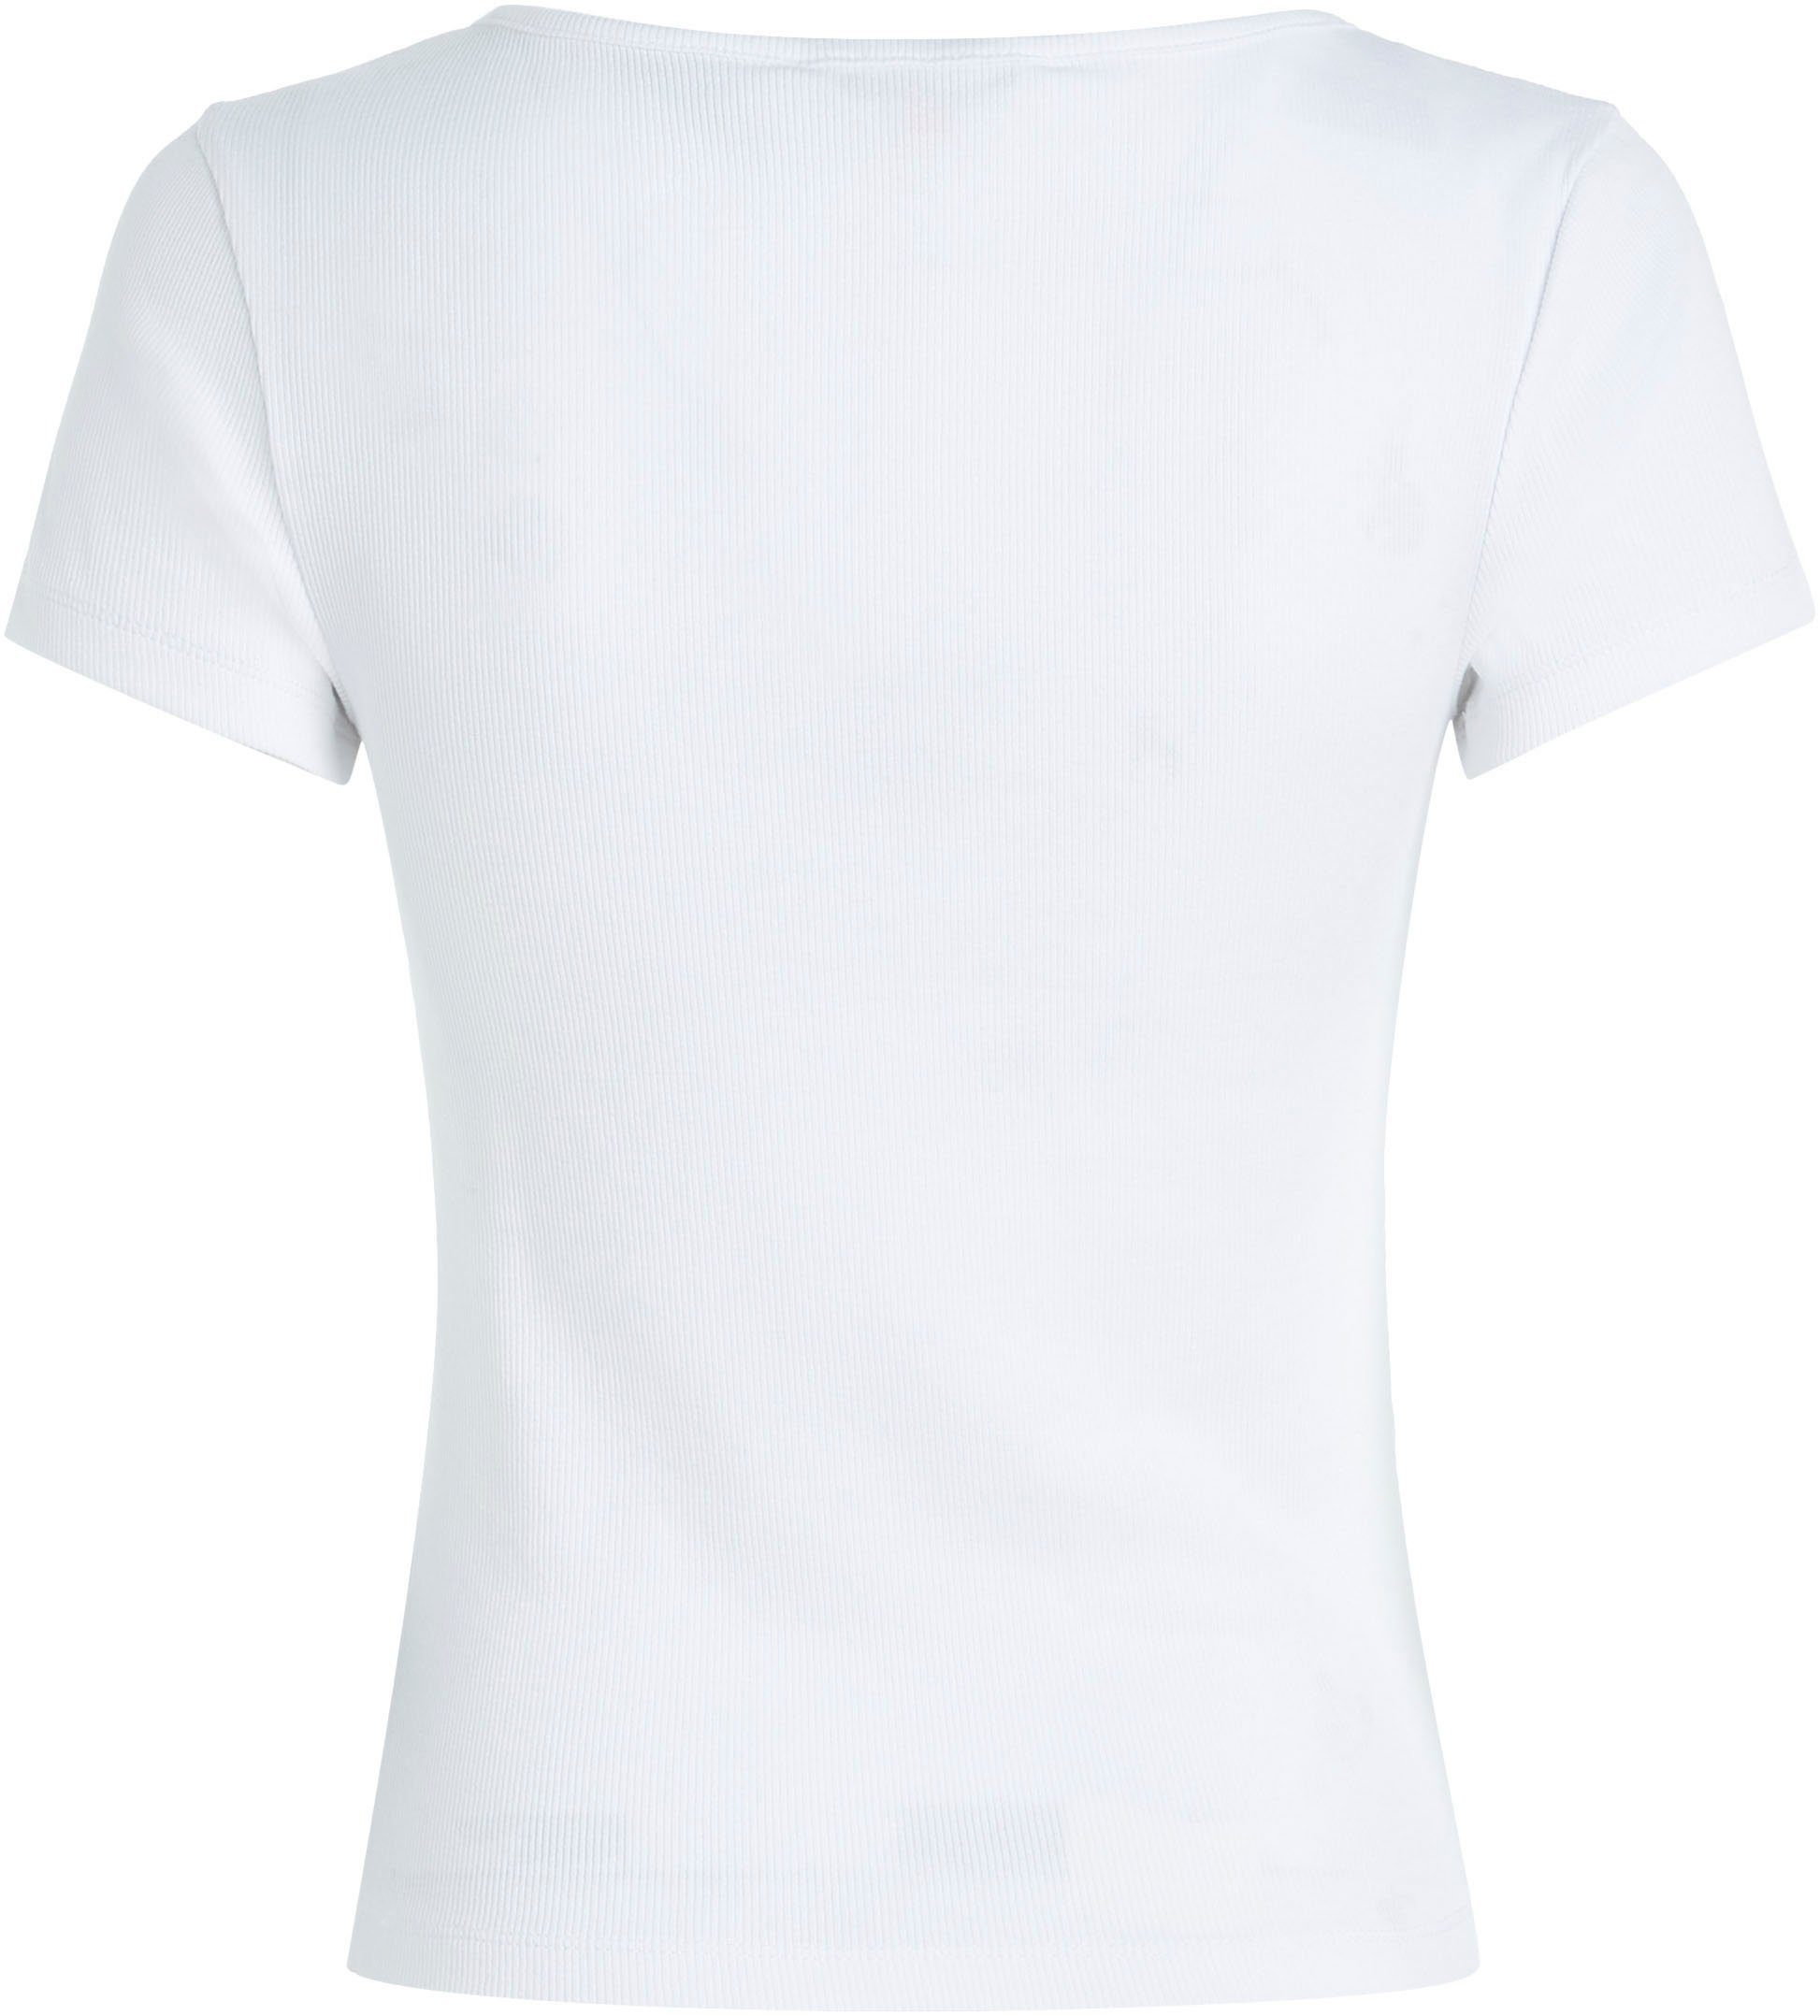 BUTTON Jeans T-Shirt Tommy C-NECK BBY Logostickerei mit White Jeans Tommy TJW RIB